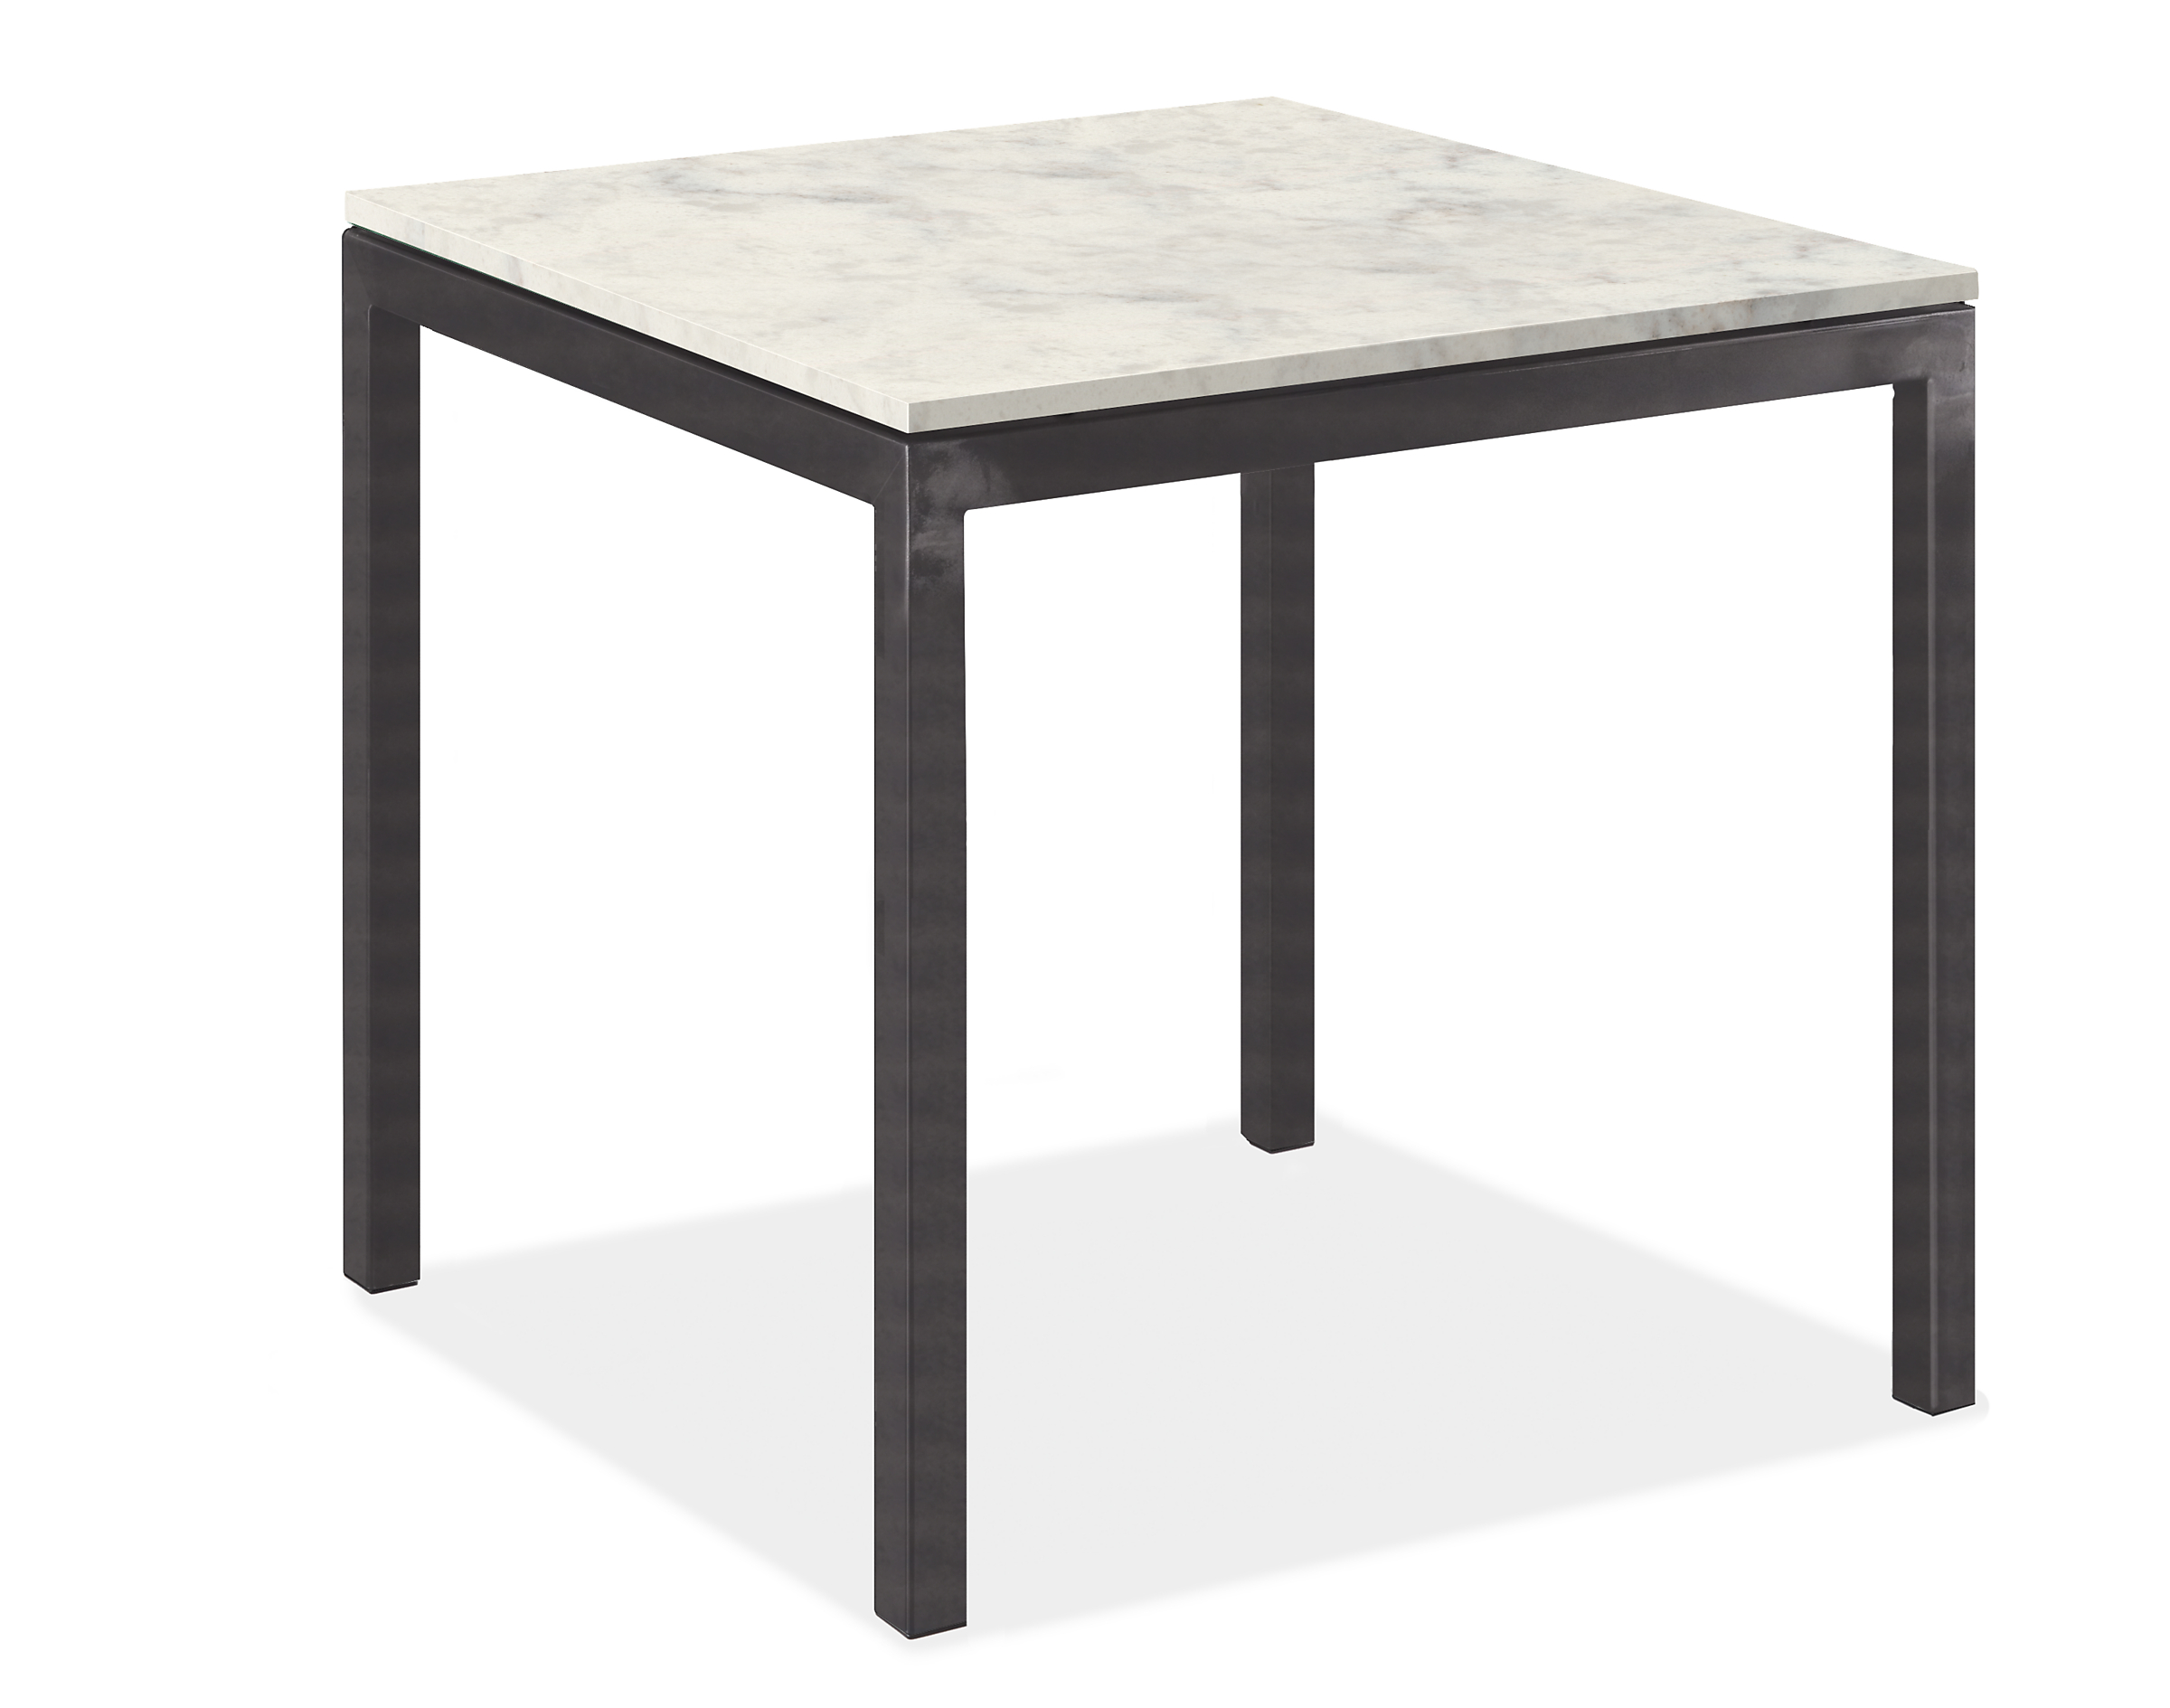 Parsons 27w 27d 24h End Table with 1" Leg